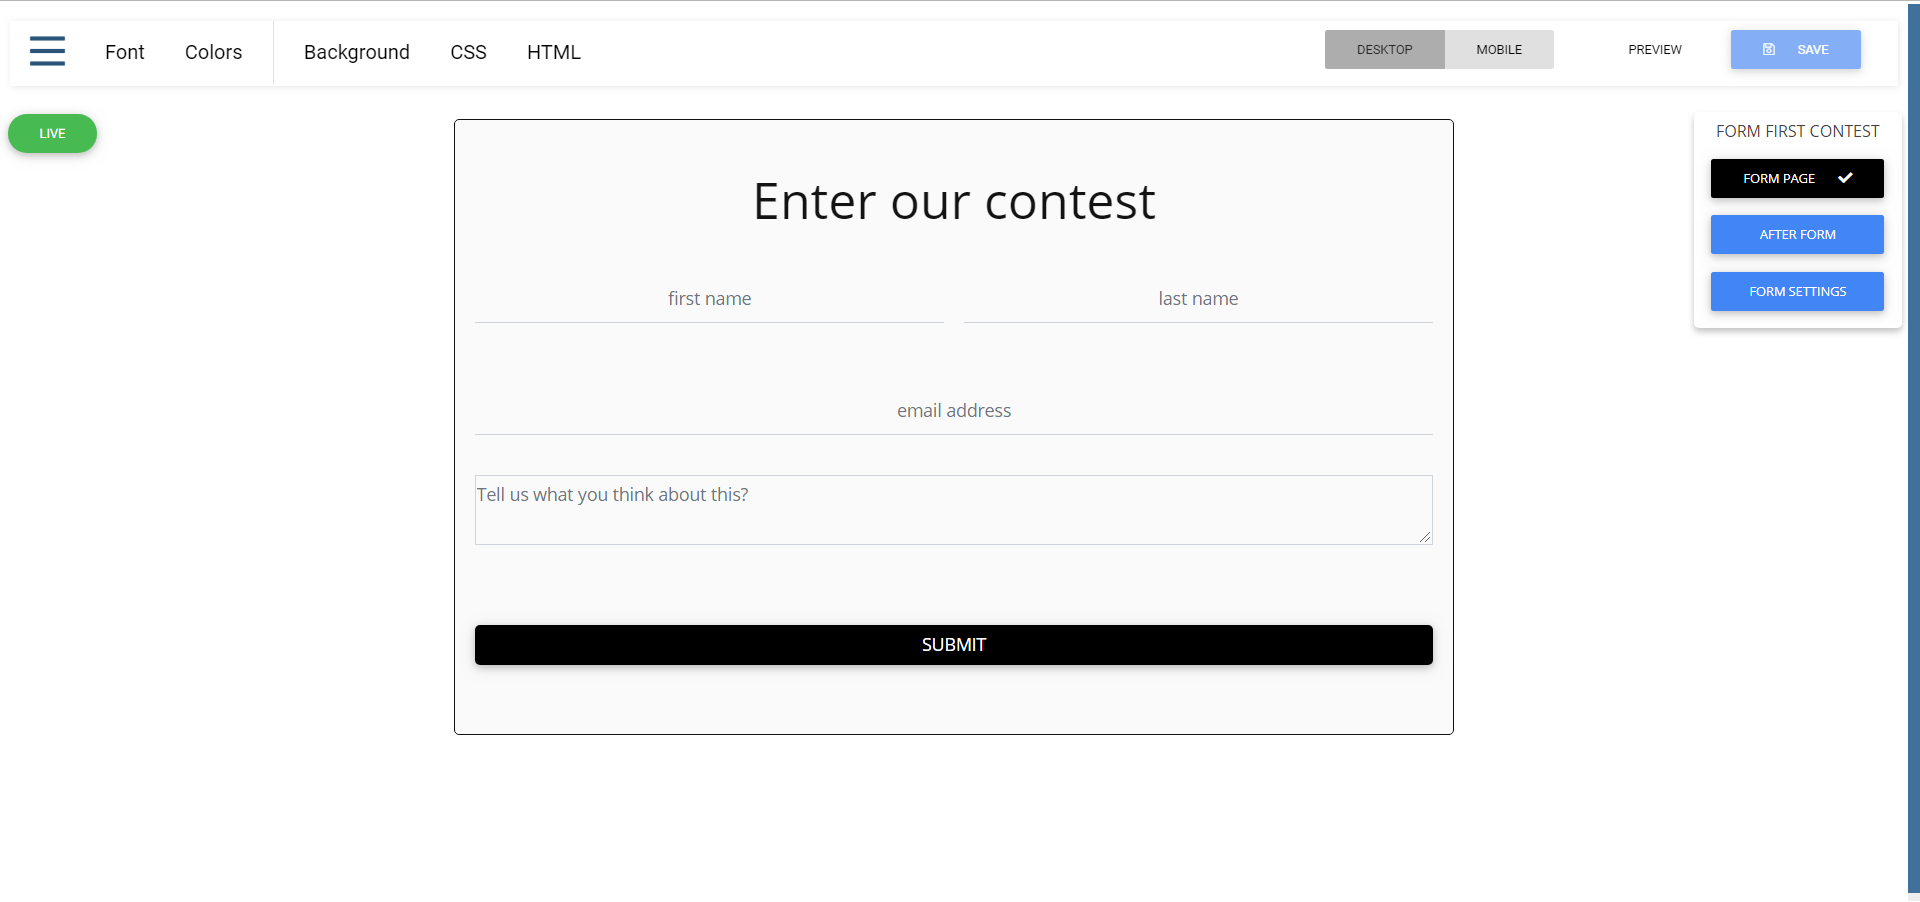 Form first contest options